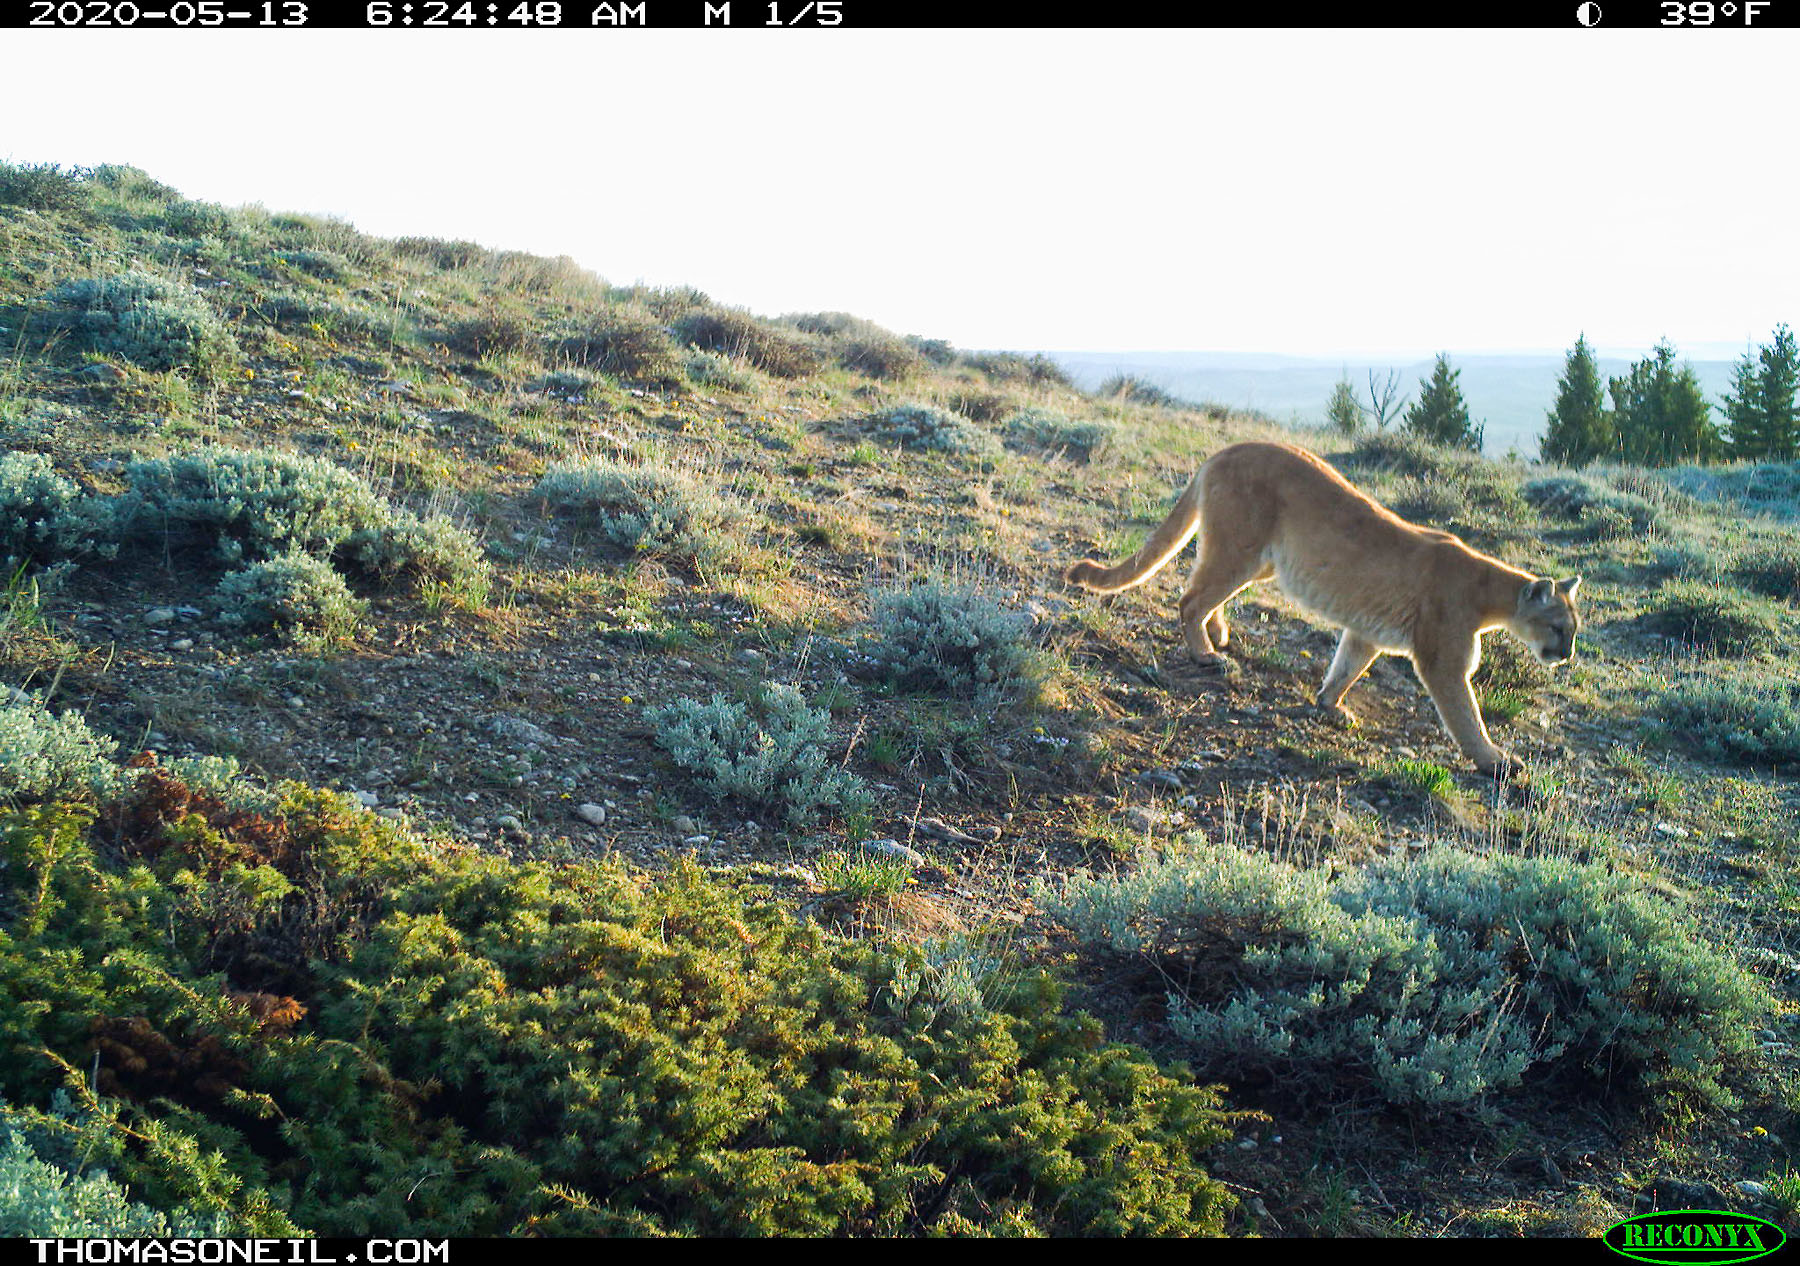 Mountain Lion near Luther, MT, 2020.